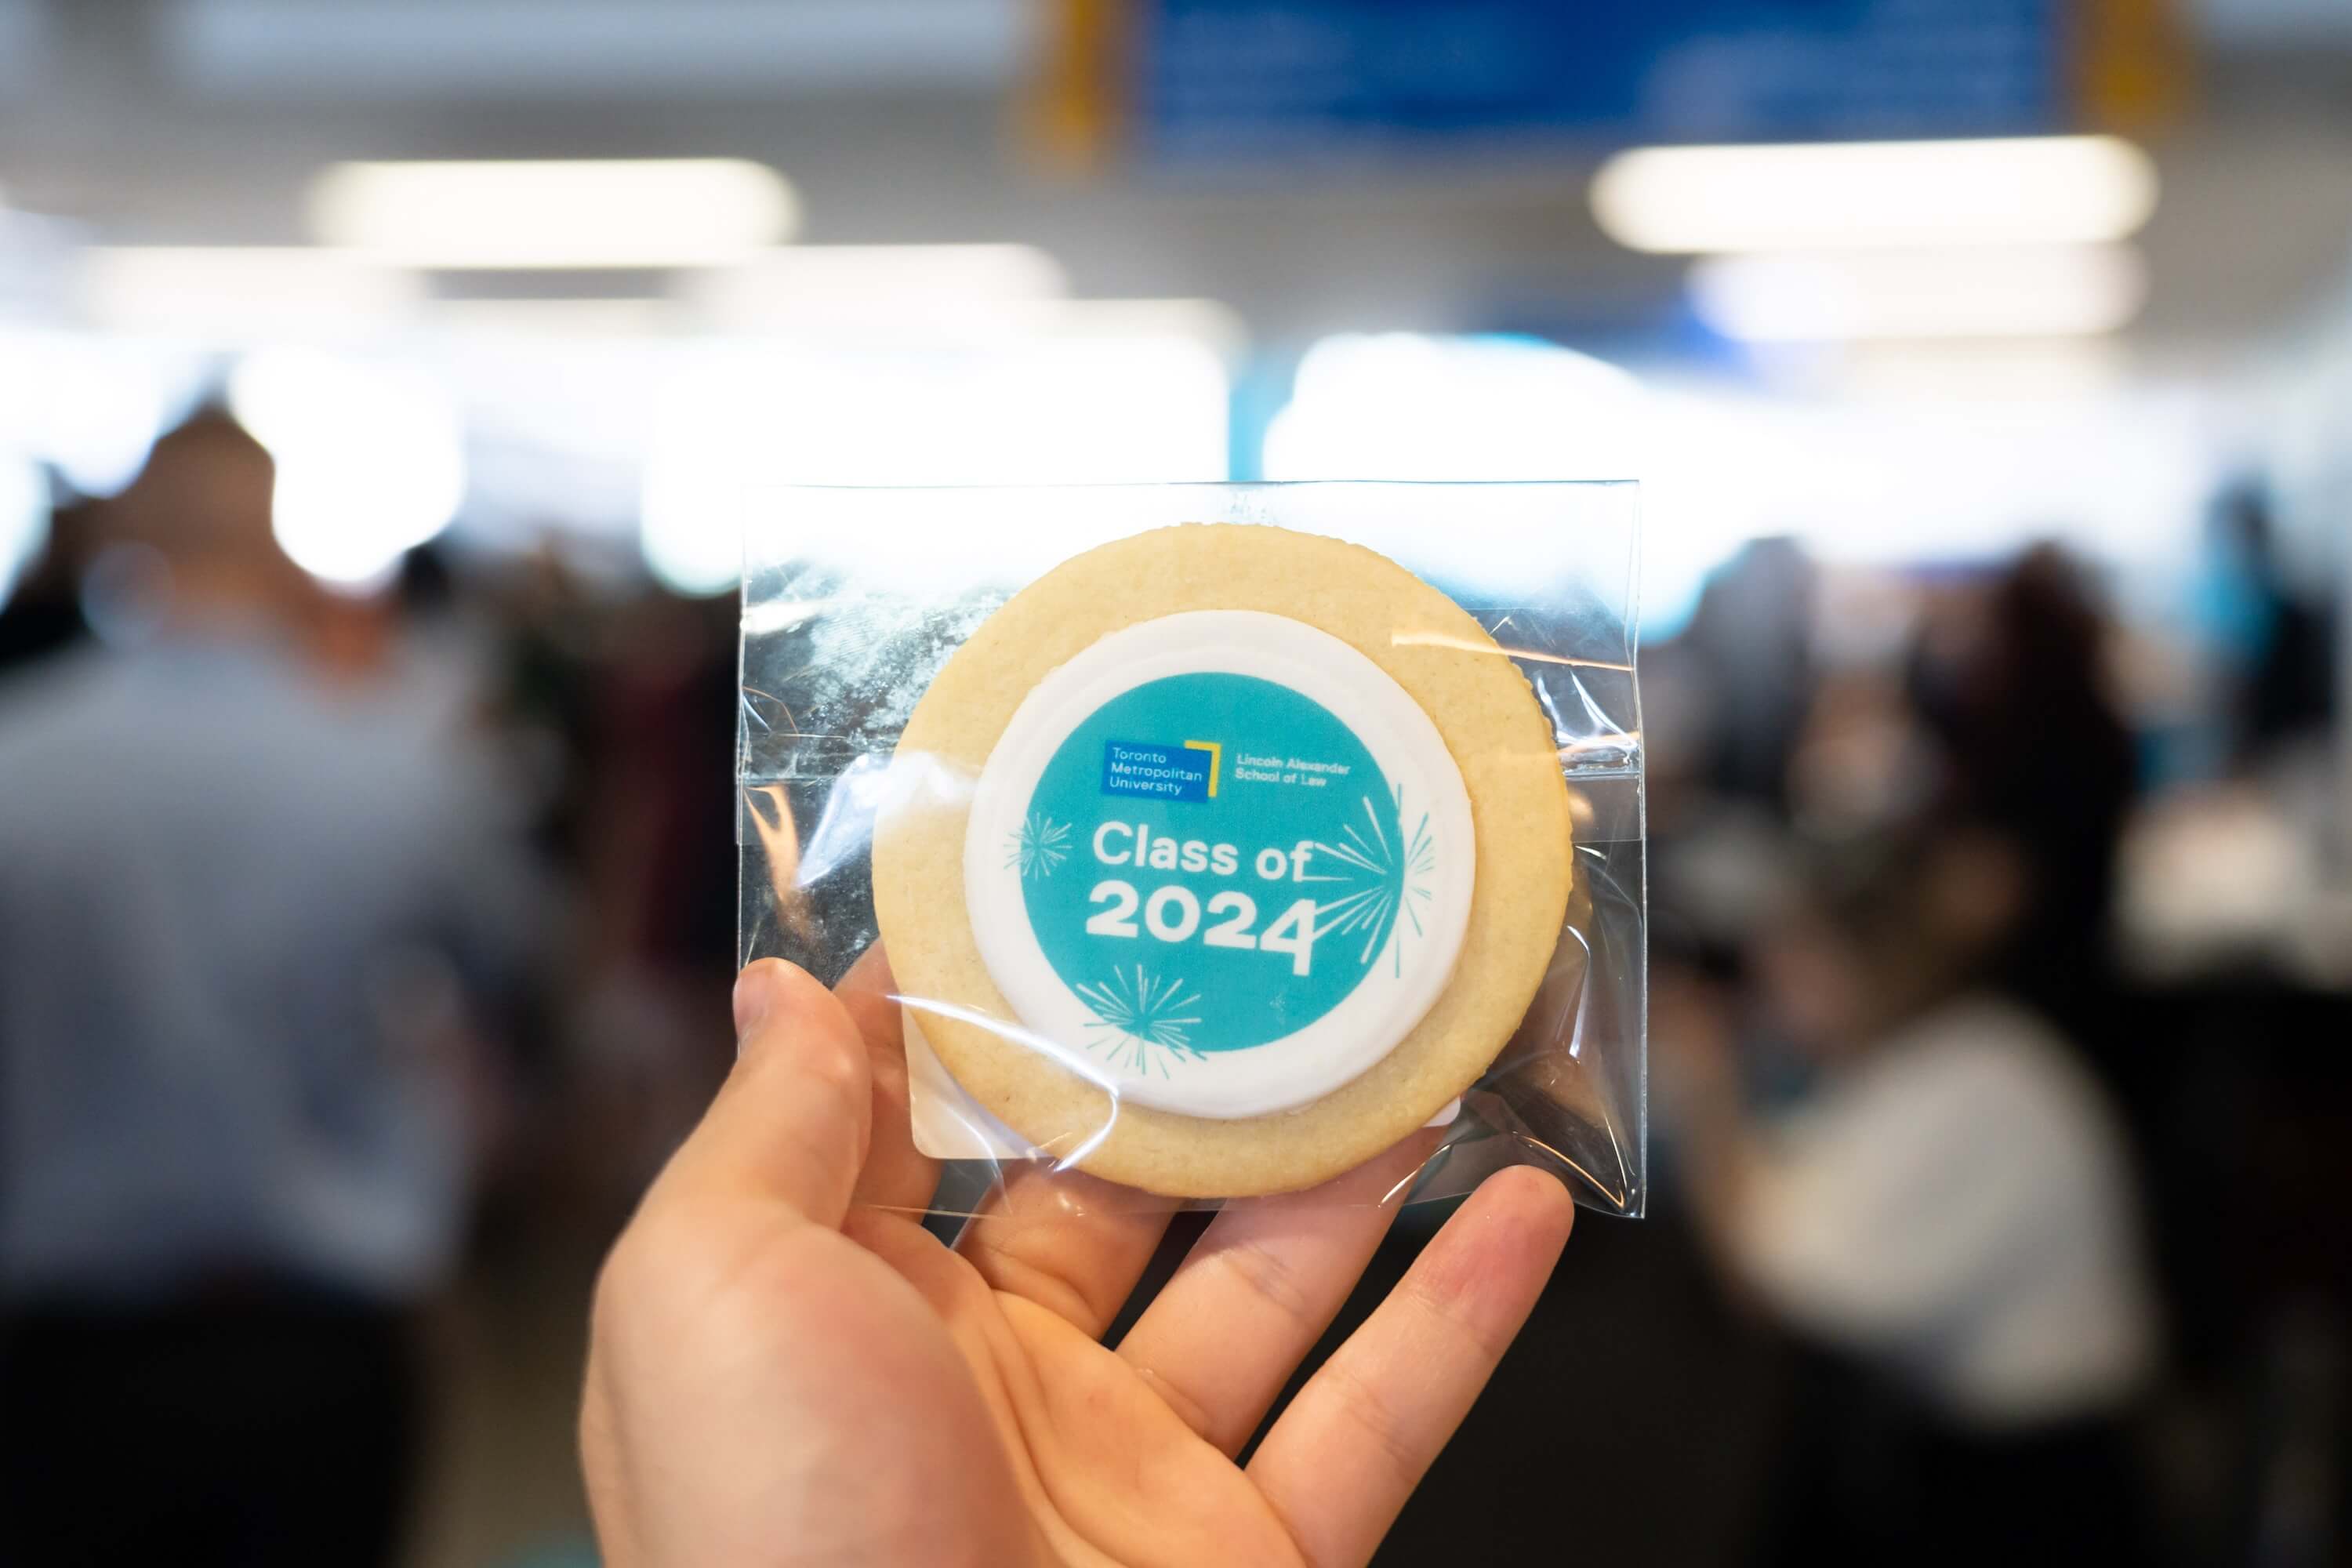 A hand holding a "Class of 2024" cookie.